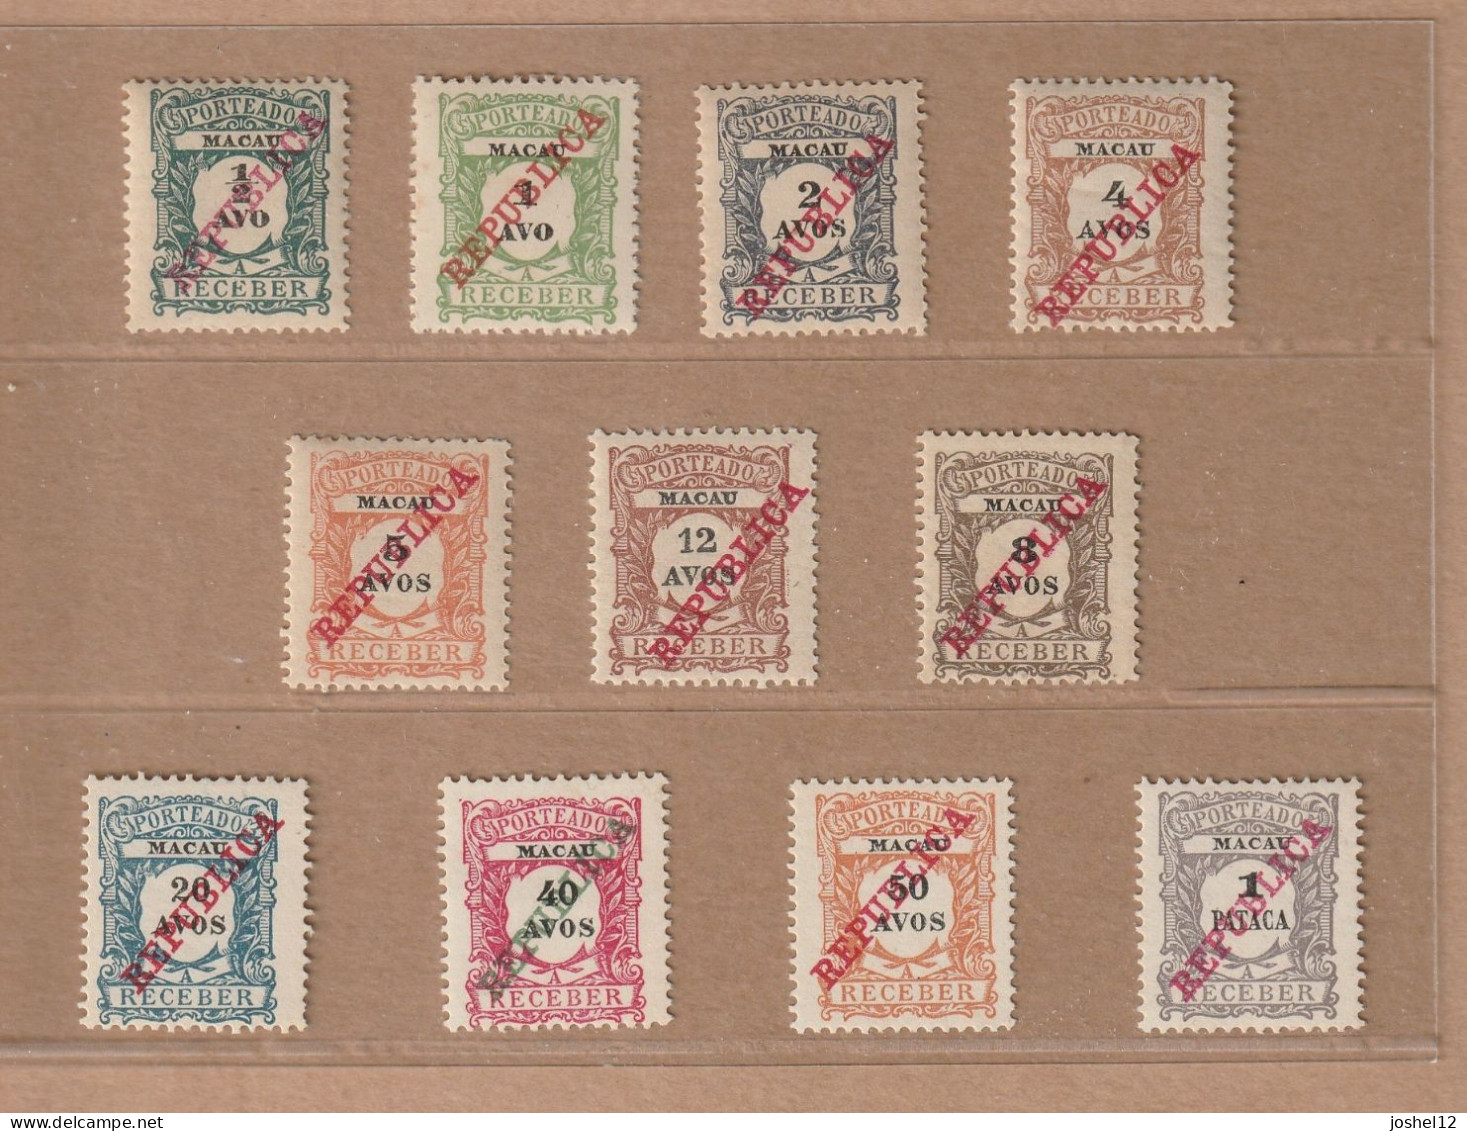 Macau Macao 1911 Postage Due Overprint REPUBLICA Set. MH/With Or Without  Gum. Mostly Fine - Unused Stamps